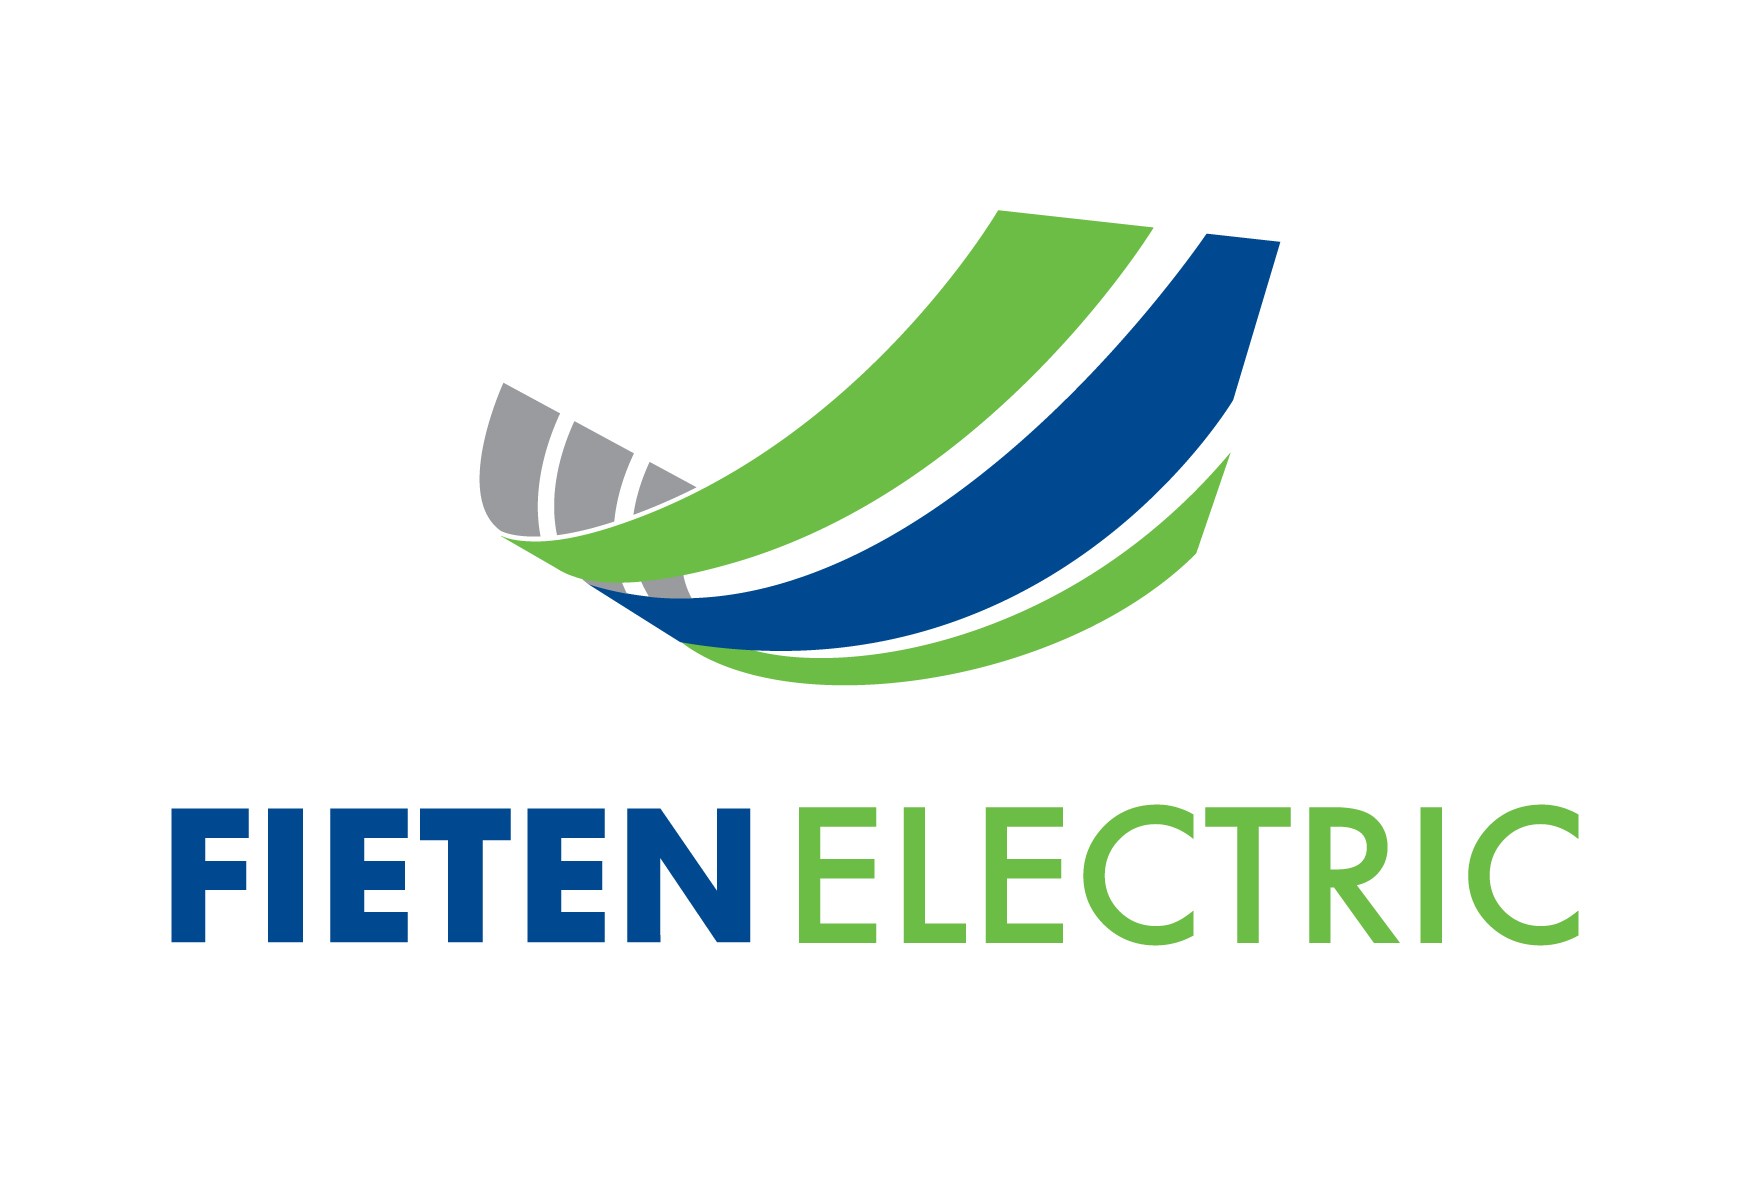 Charge card logo of Fieten Electric